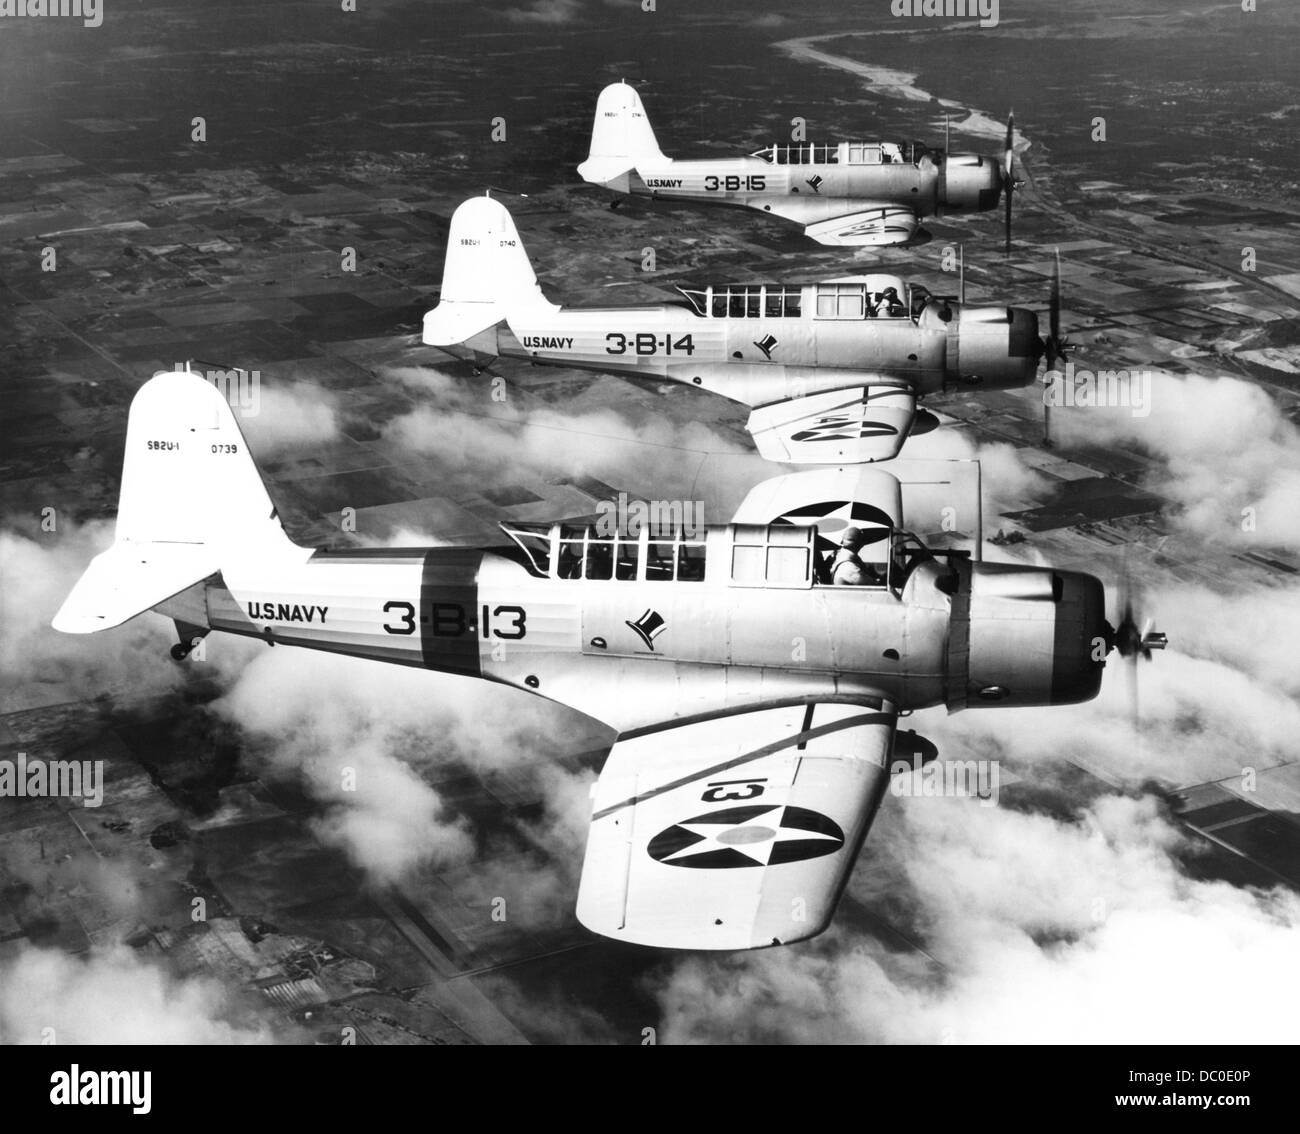 1940s THREE WORLD WAR II US NAVY DIVE BOMBERS FLYING IN FORMATION Stock Photo